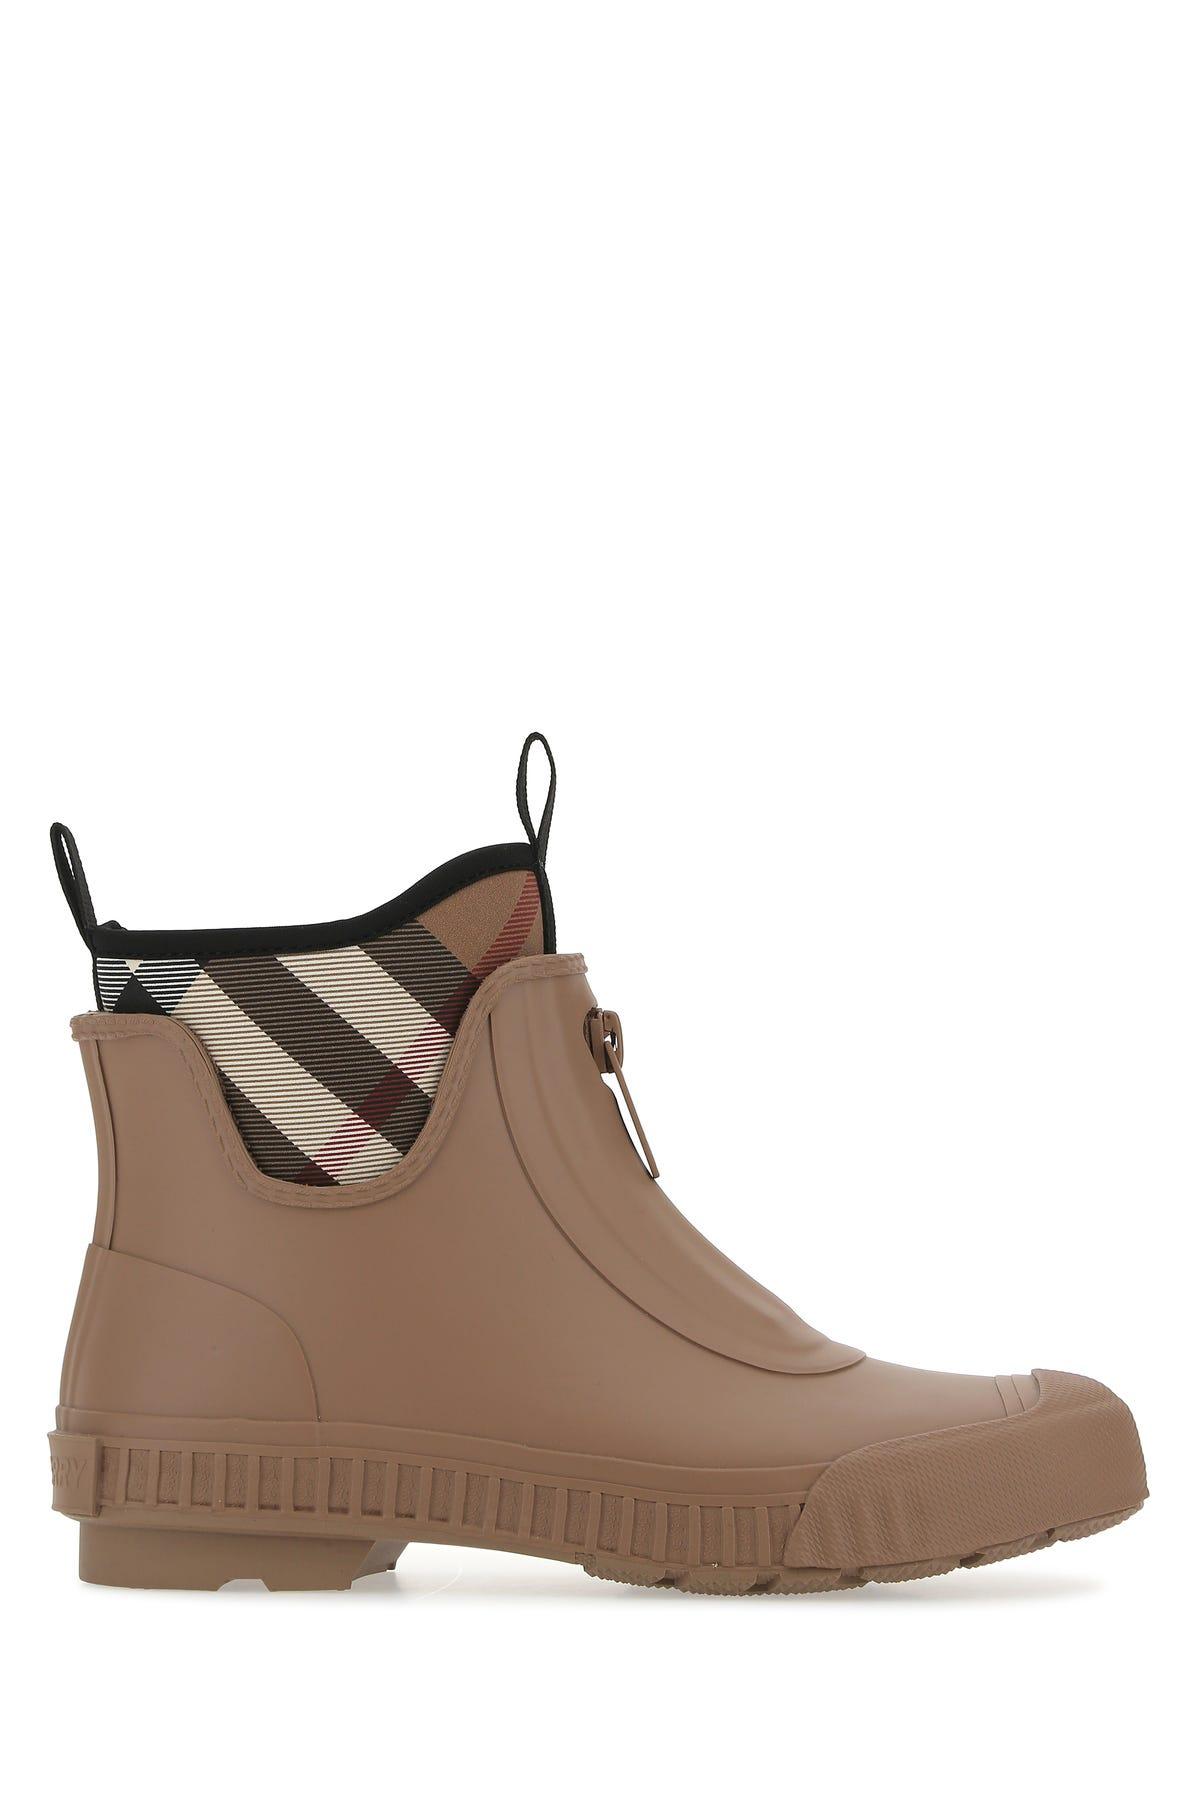 Burberry Black Rubber Ankle Boots in Brown | Lyst